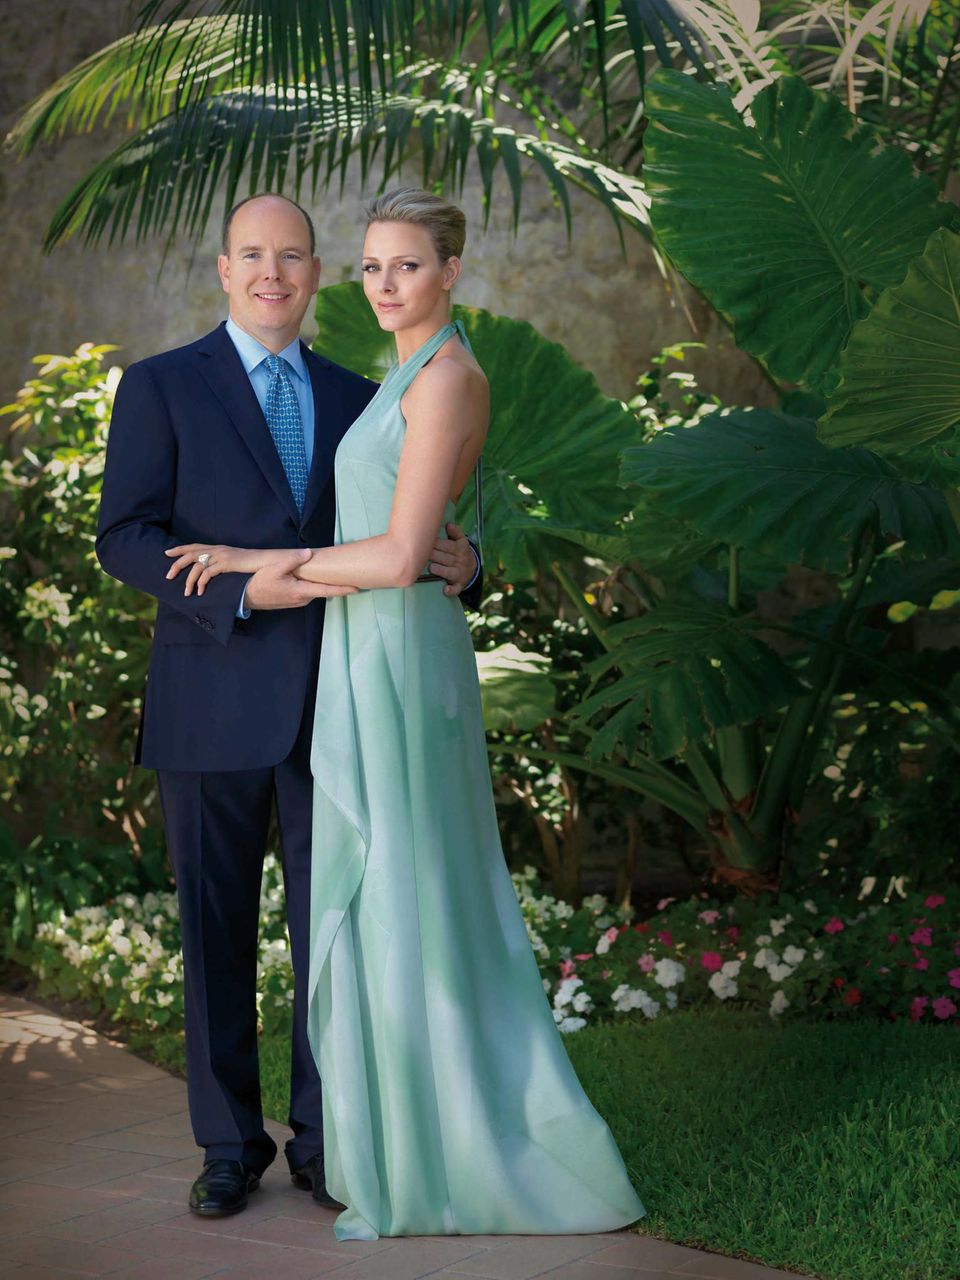 Prince Albert and Charlene Wittstock officially announced their engagement with this photo on June 23, 2010. 